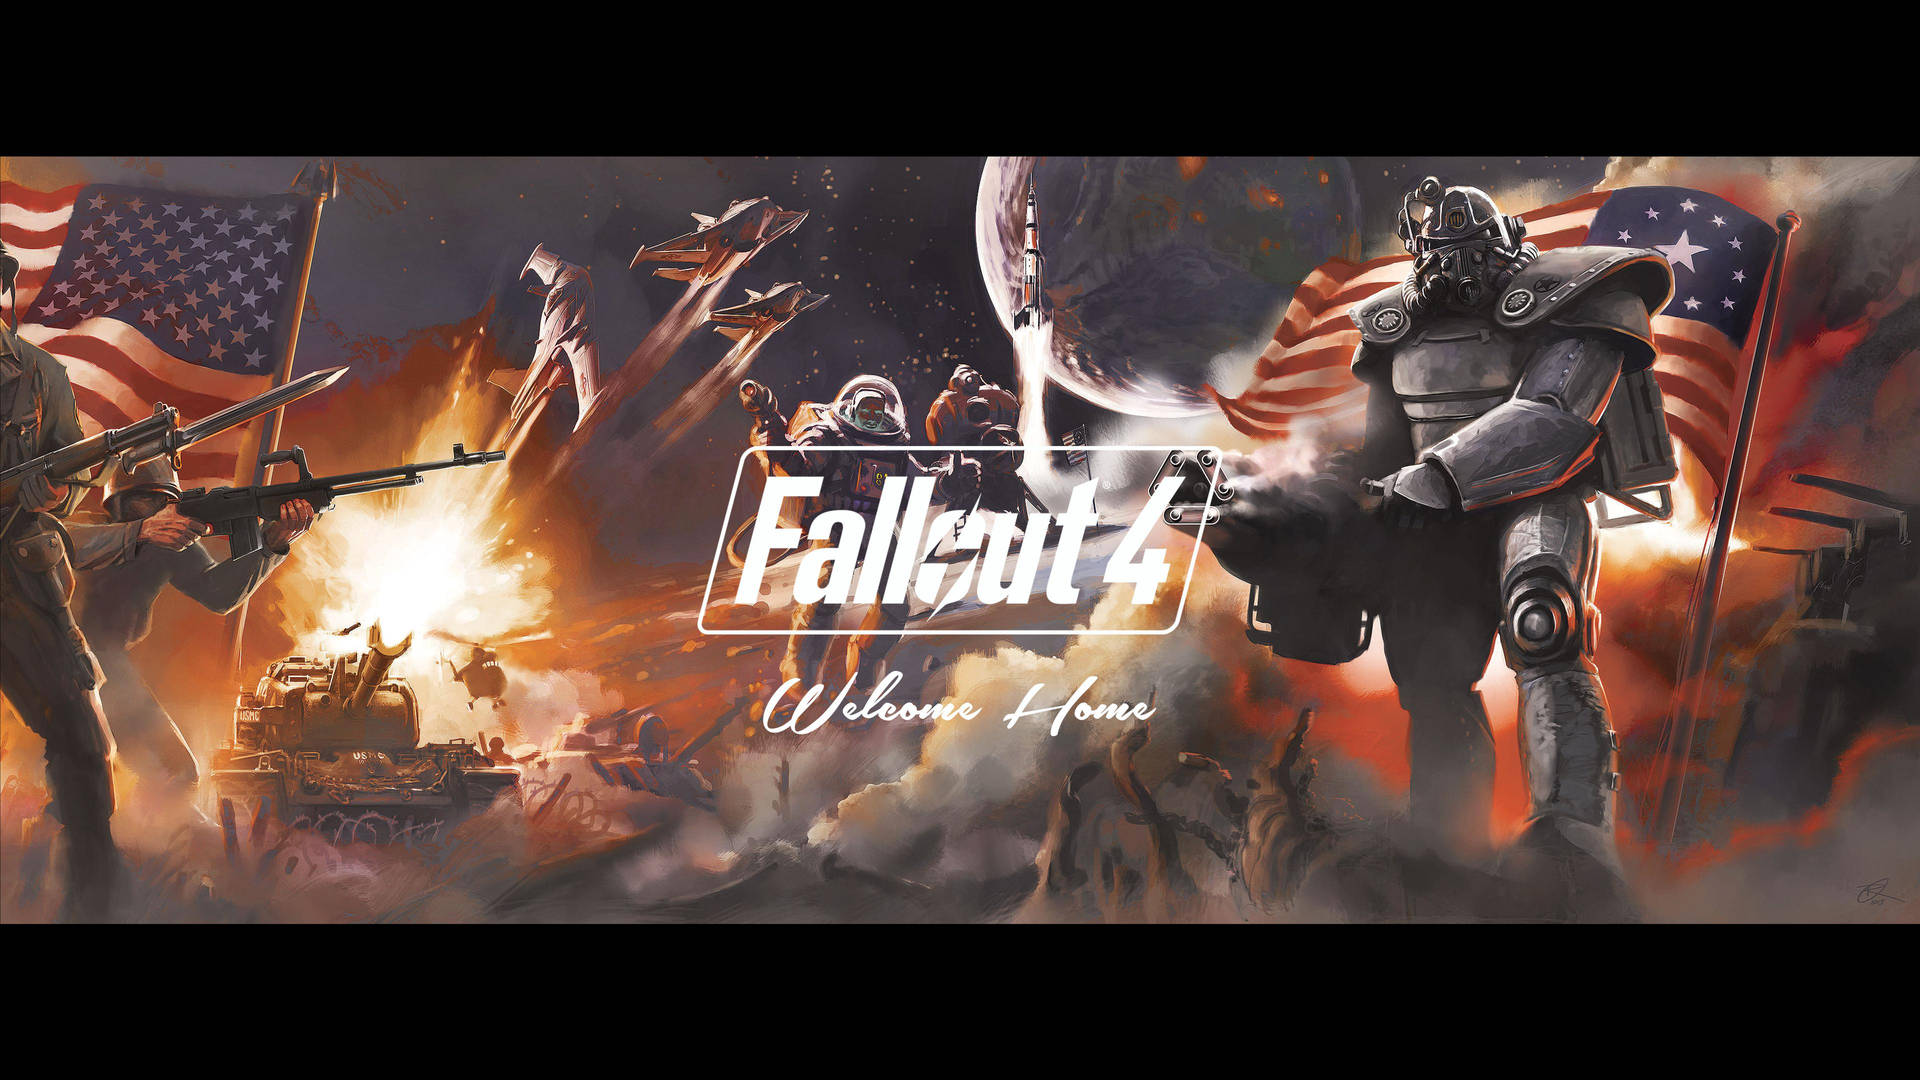 Fallout 4 Welcome Home Soldiers